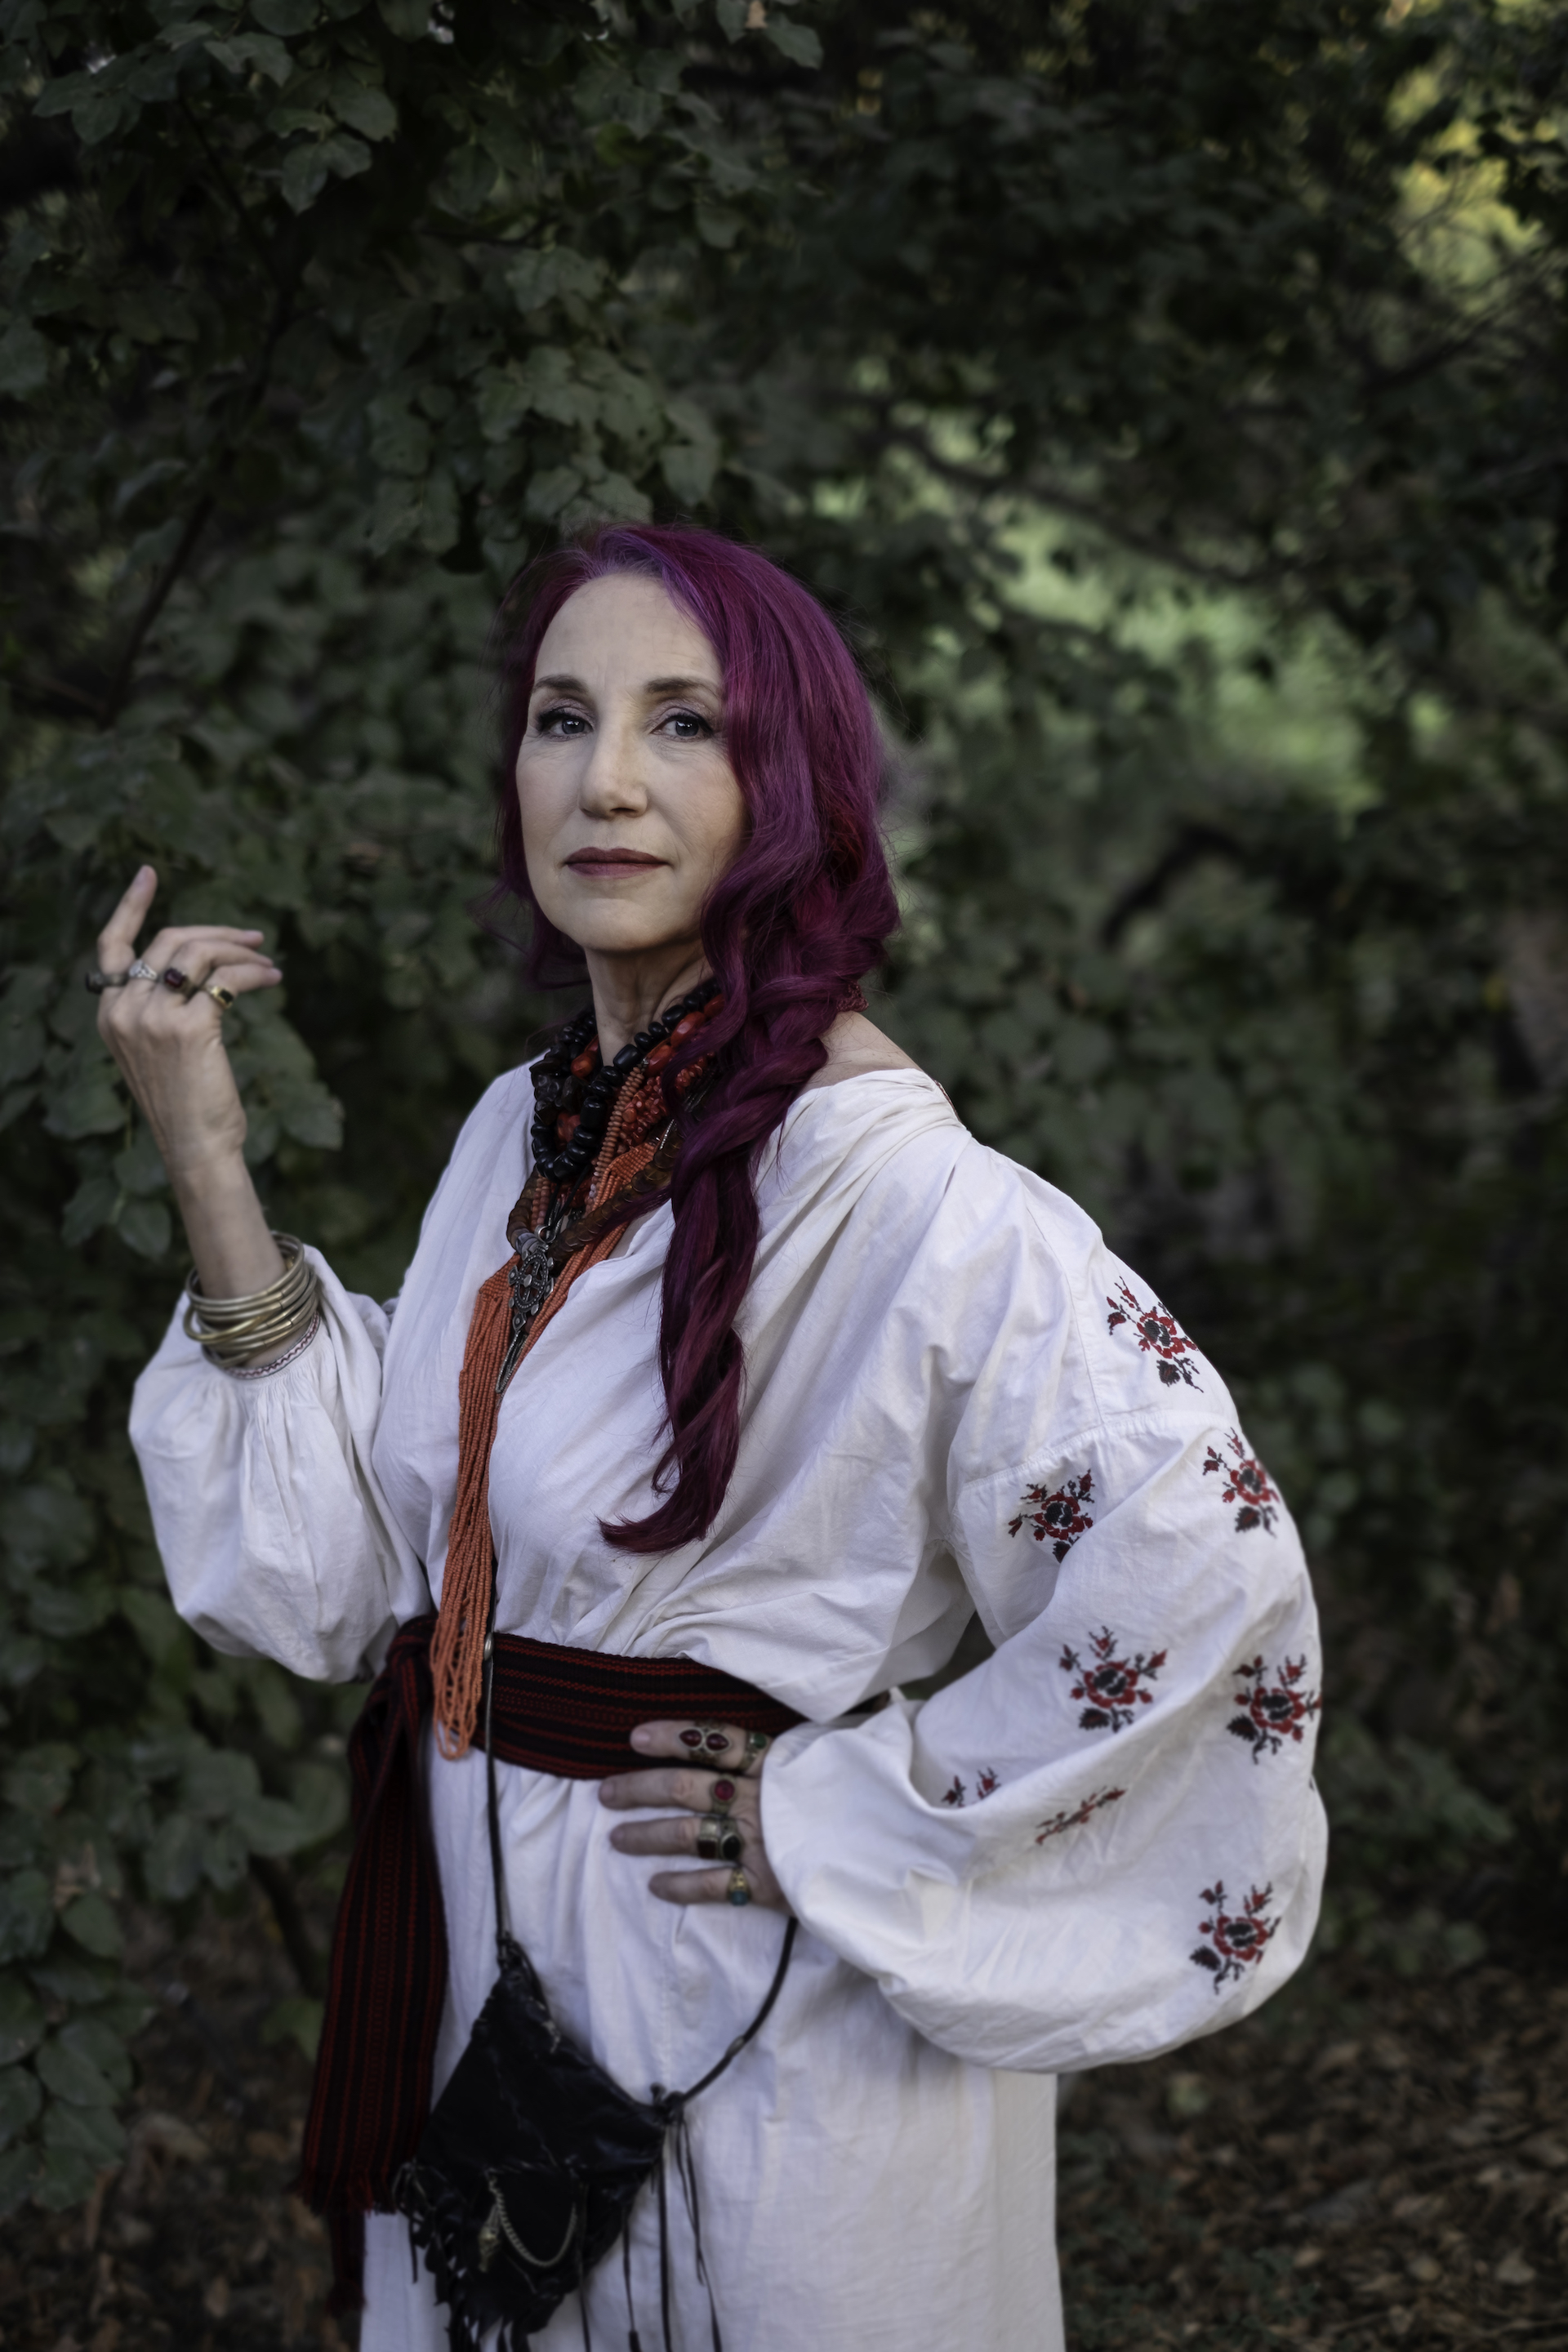 Witchcraft Expert Offers Private Online Spiritual Pagan Mentoring For Women